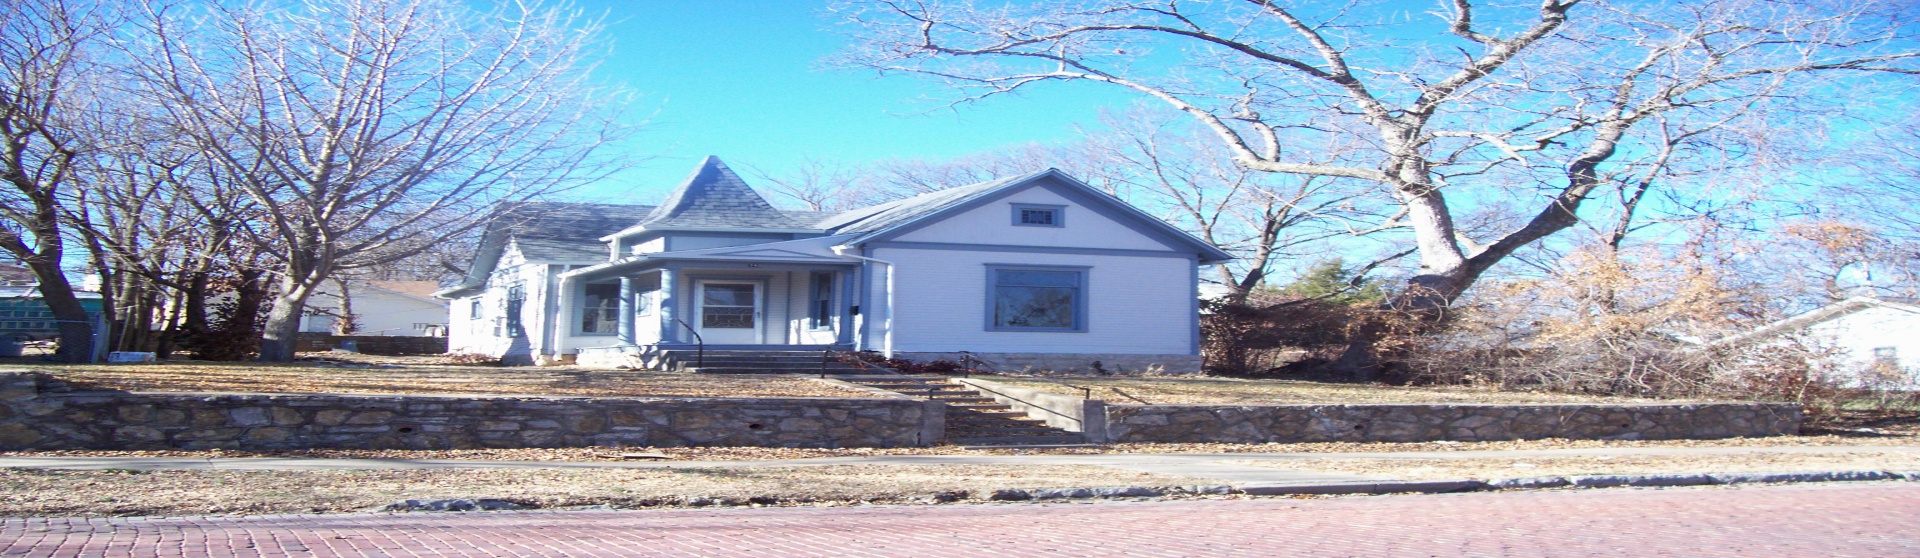 744 S Main, Fort Scott, Bourbon County, Kansas, United States 66701, 2 Bedrooms Bedrooms, ,1 BathroomBathrooms,House,For Rent,S Main,1,1021